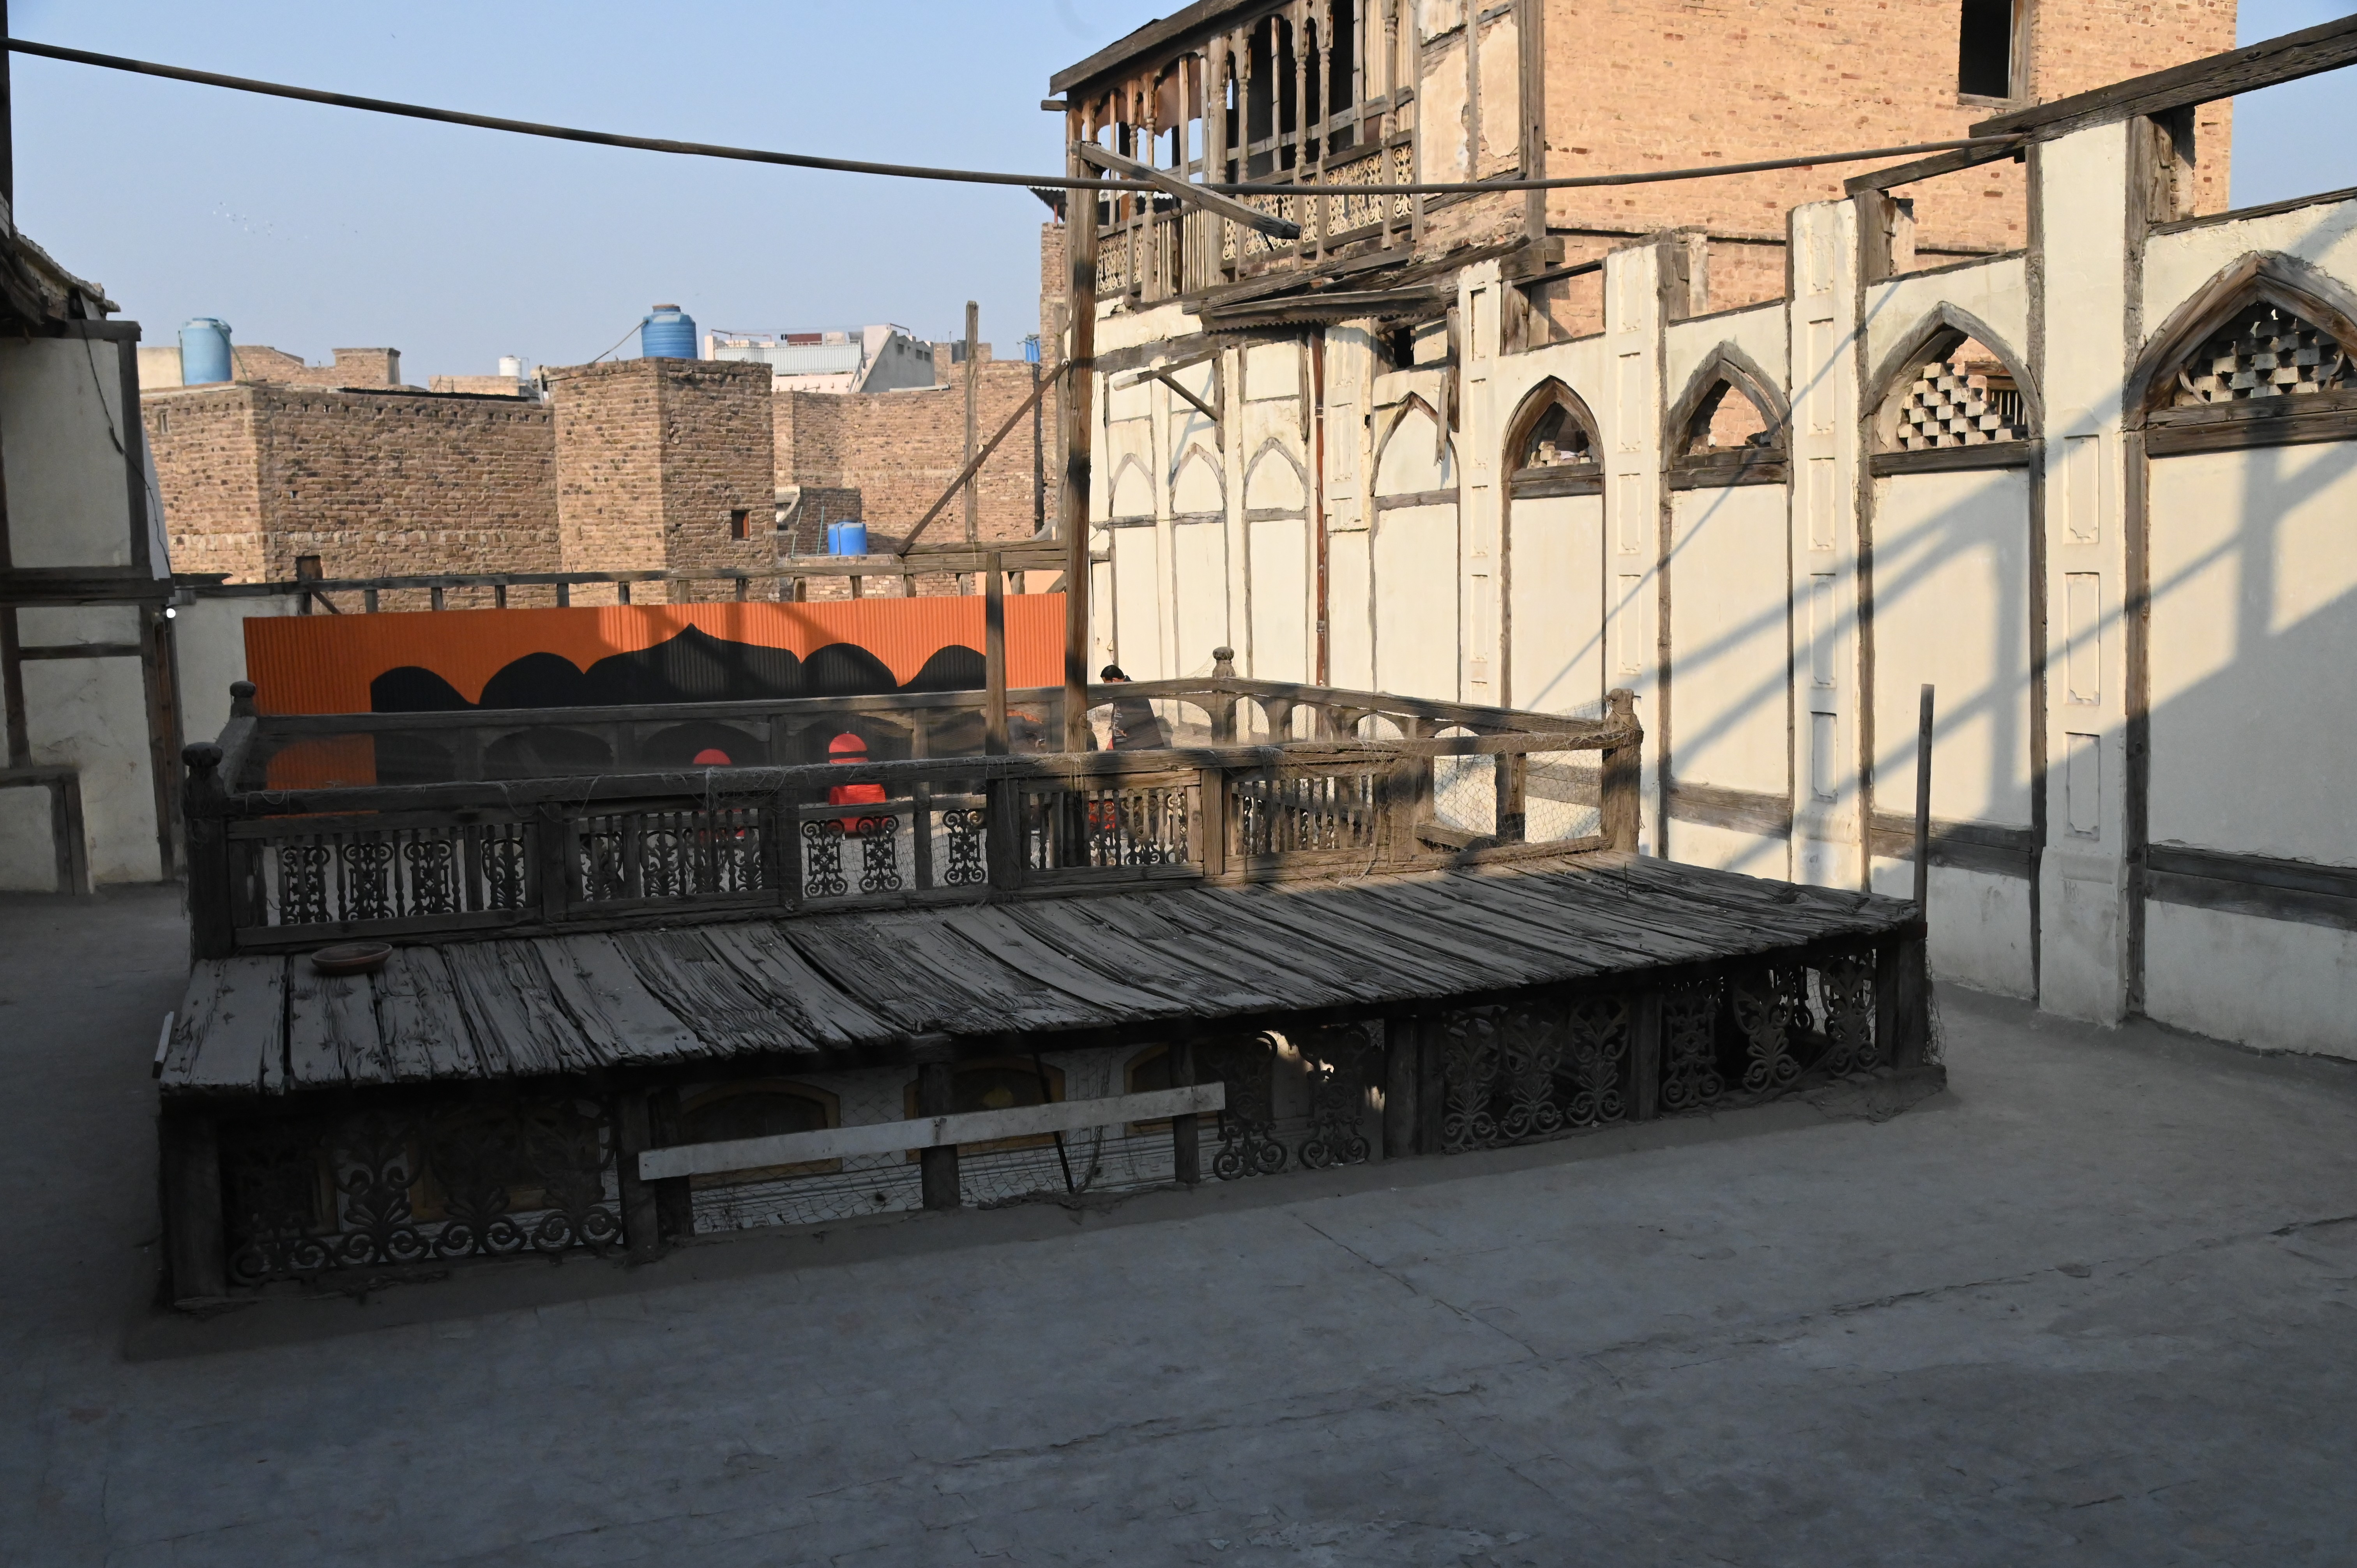 A view of one of the Sethi Mohallah's courtyards